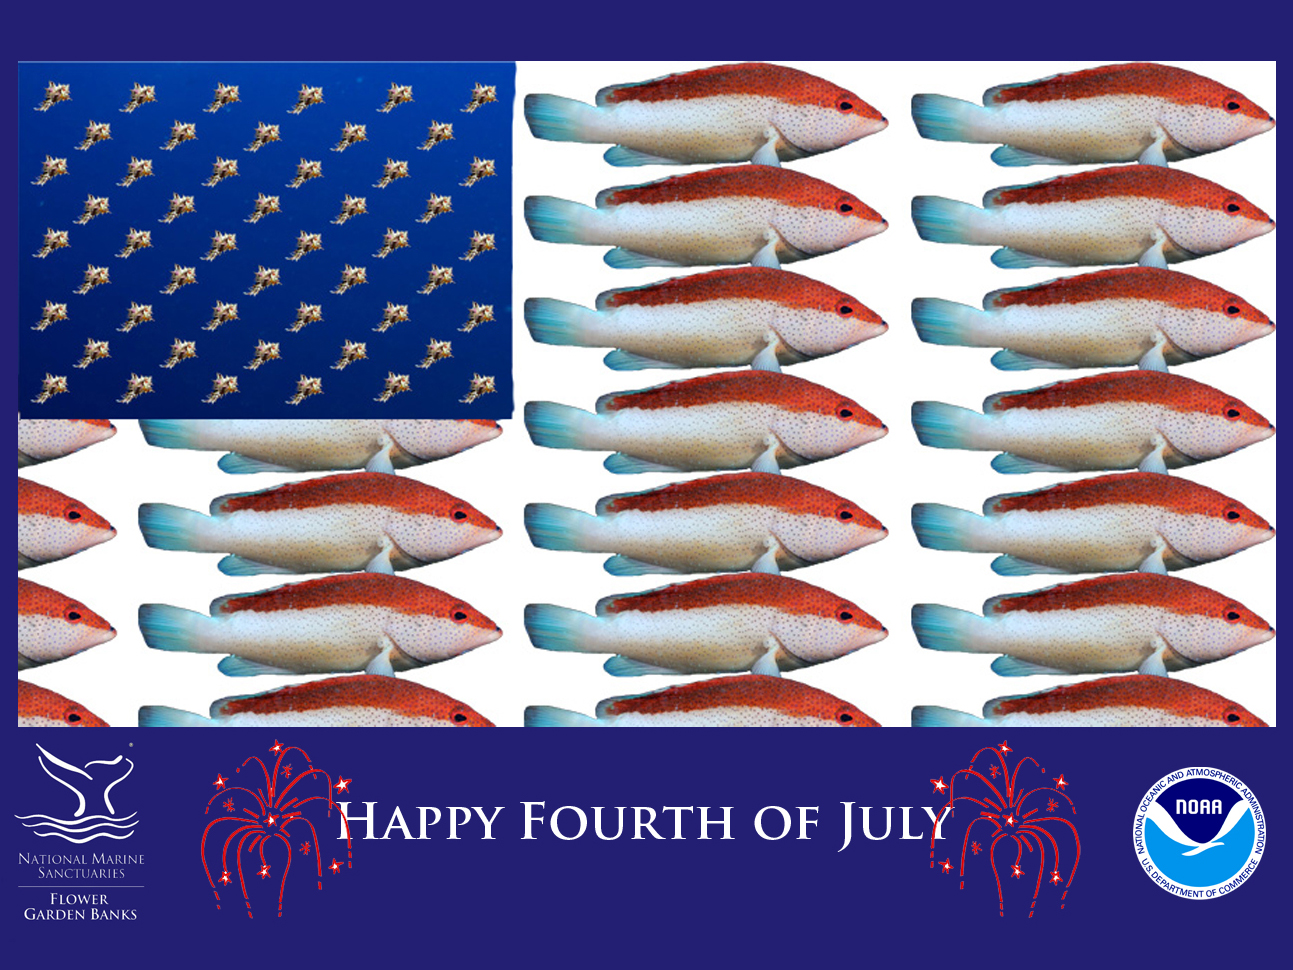 A United States flag image made using red and white fish for the stripes and murex shells for the stars.